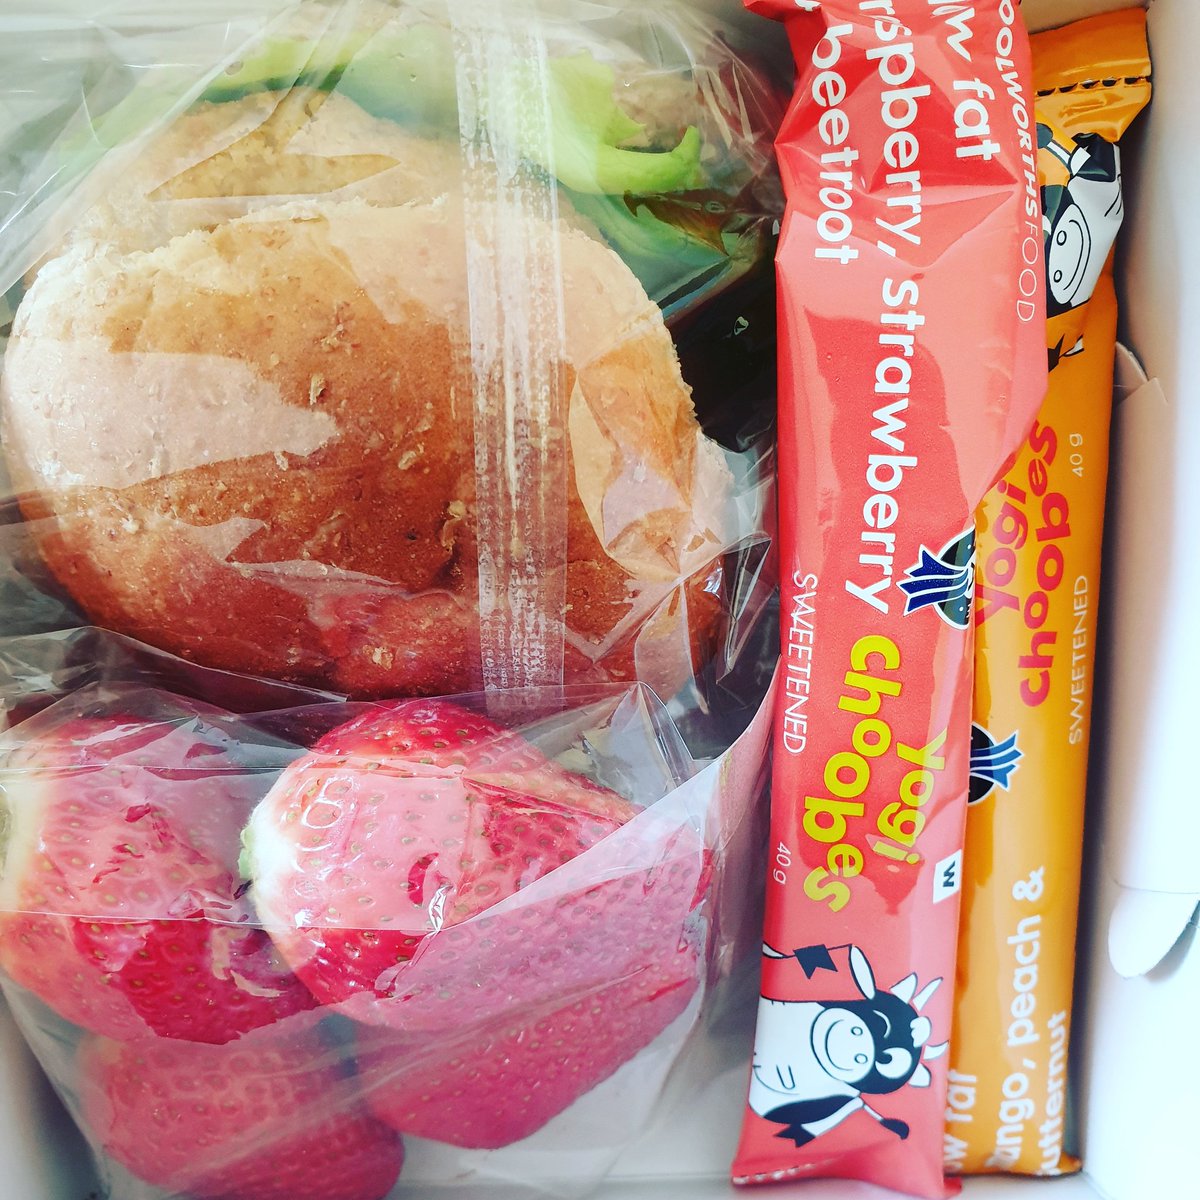 A tiny tot lunch box with some of our favourite things. Fish burger, strawberries and a couple of yogi choobs. Simply delicious.
#healthyschoollunch #balancedlunchbox #lemonzestlunches